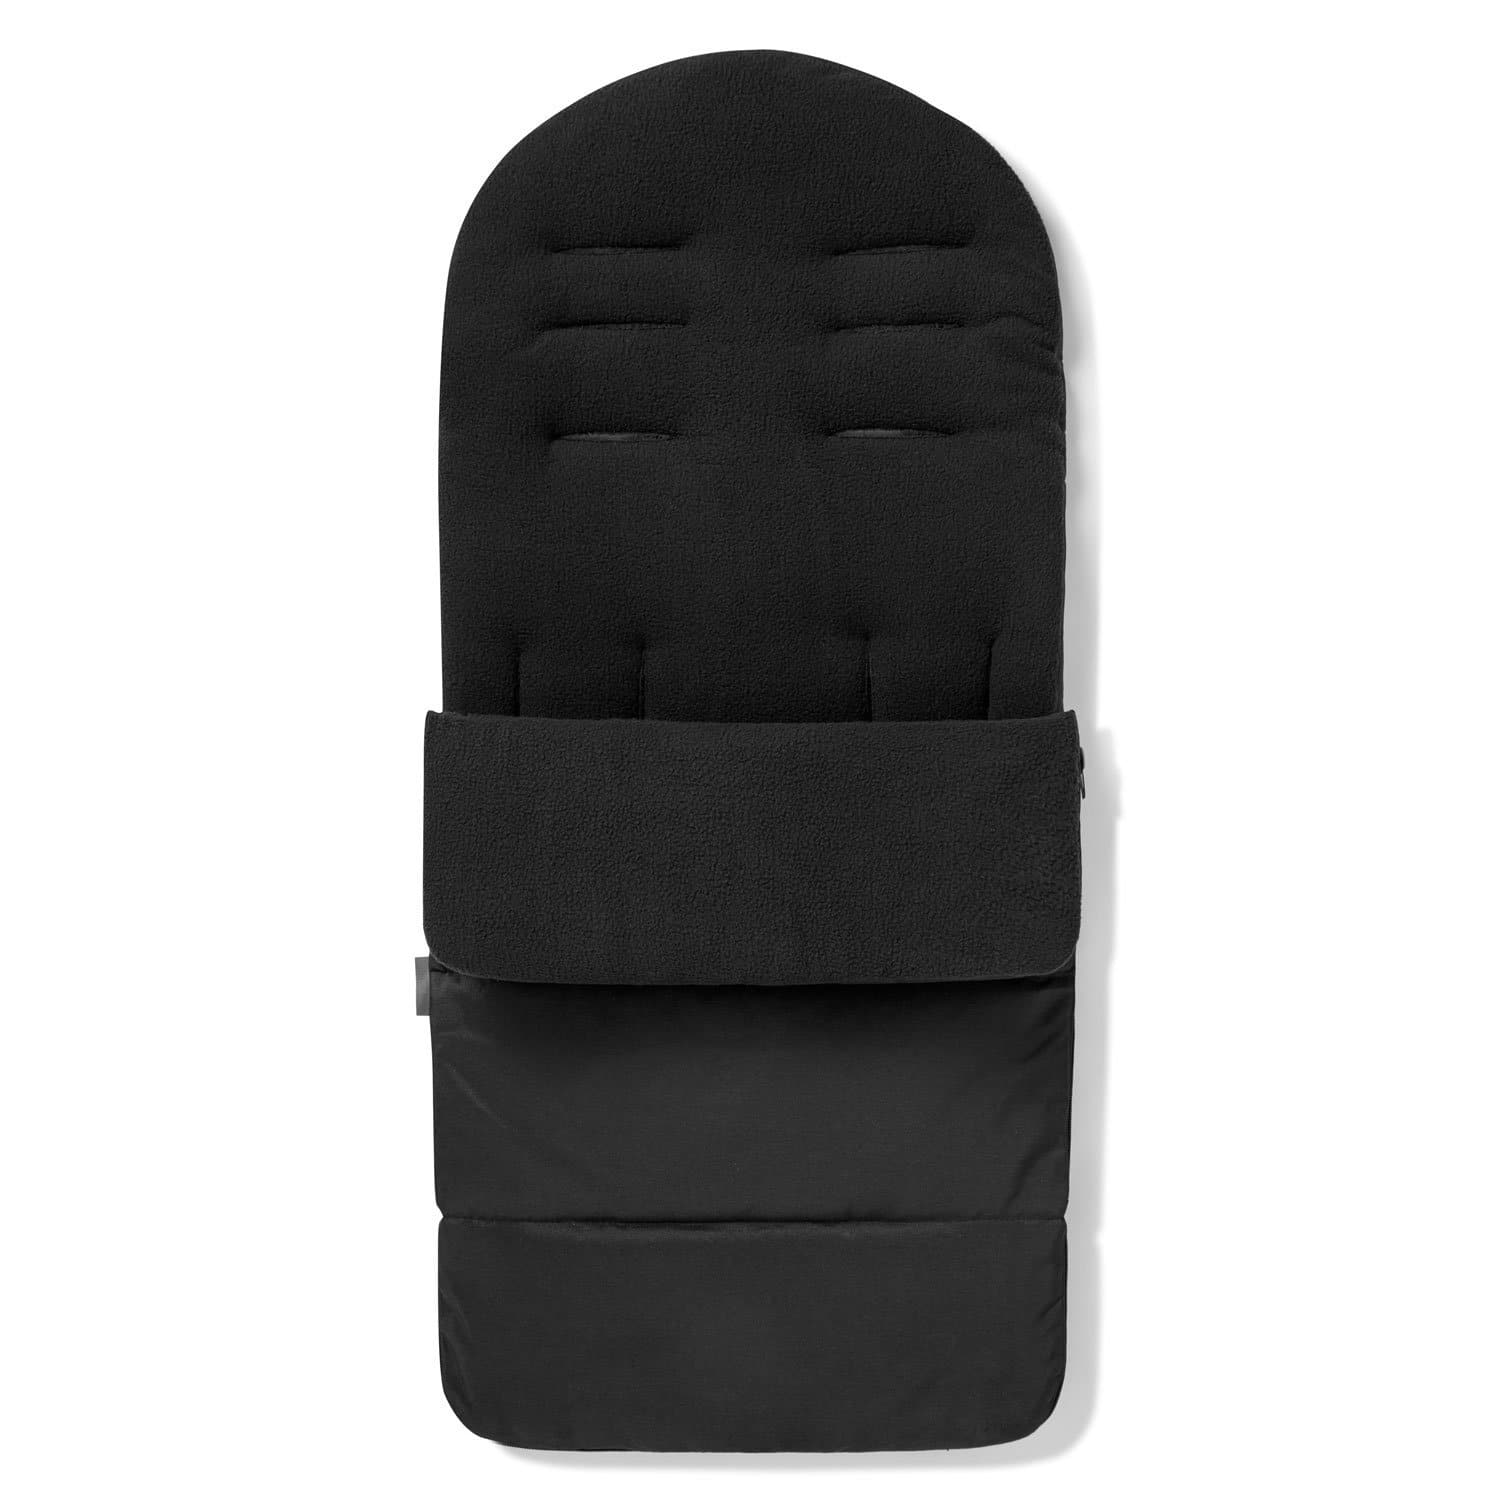 Premium Footmuff / Cosy Toes Compatible with Cam - Black Jack / Fits All Models | For Your Little One